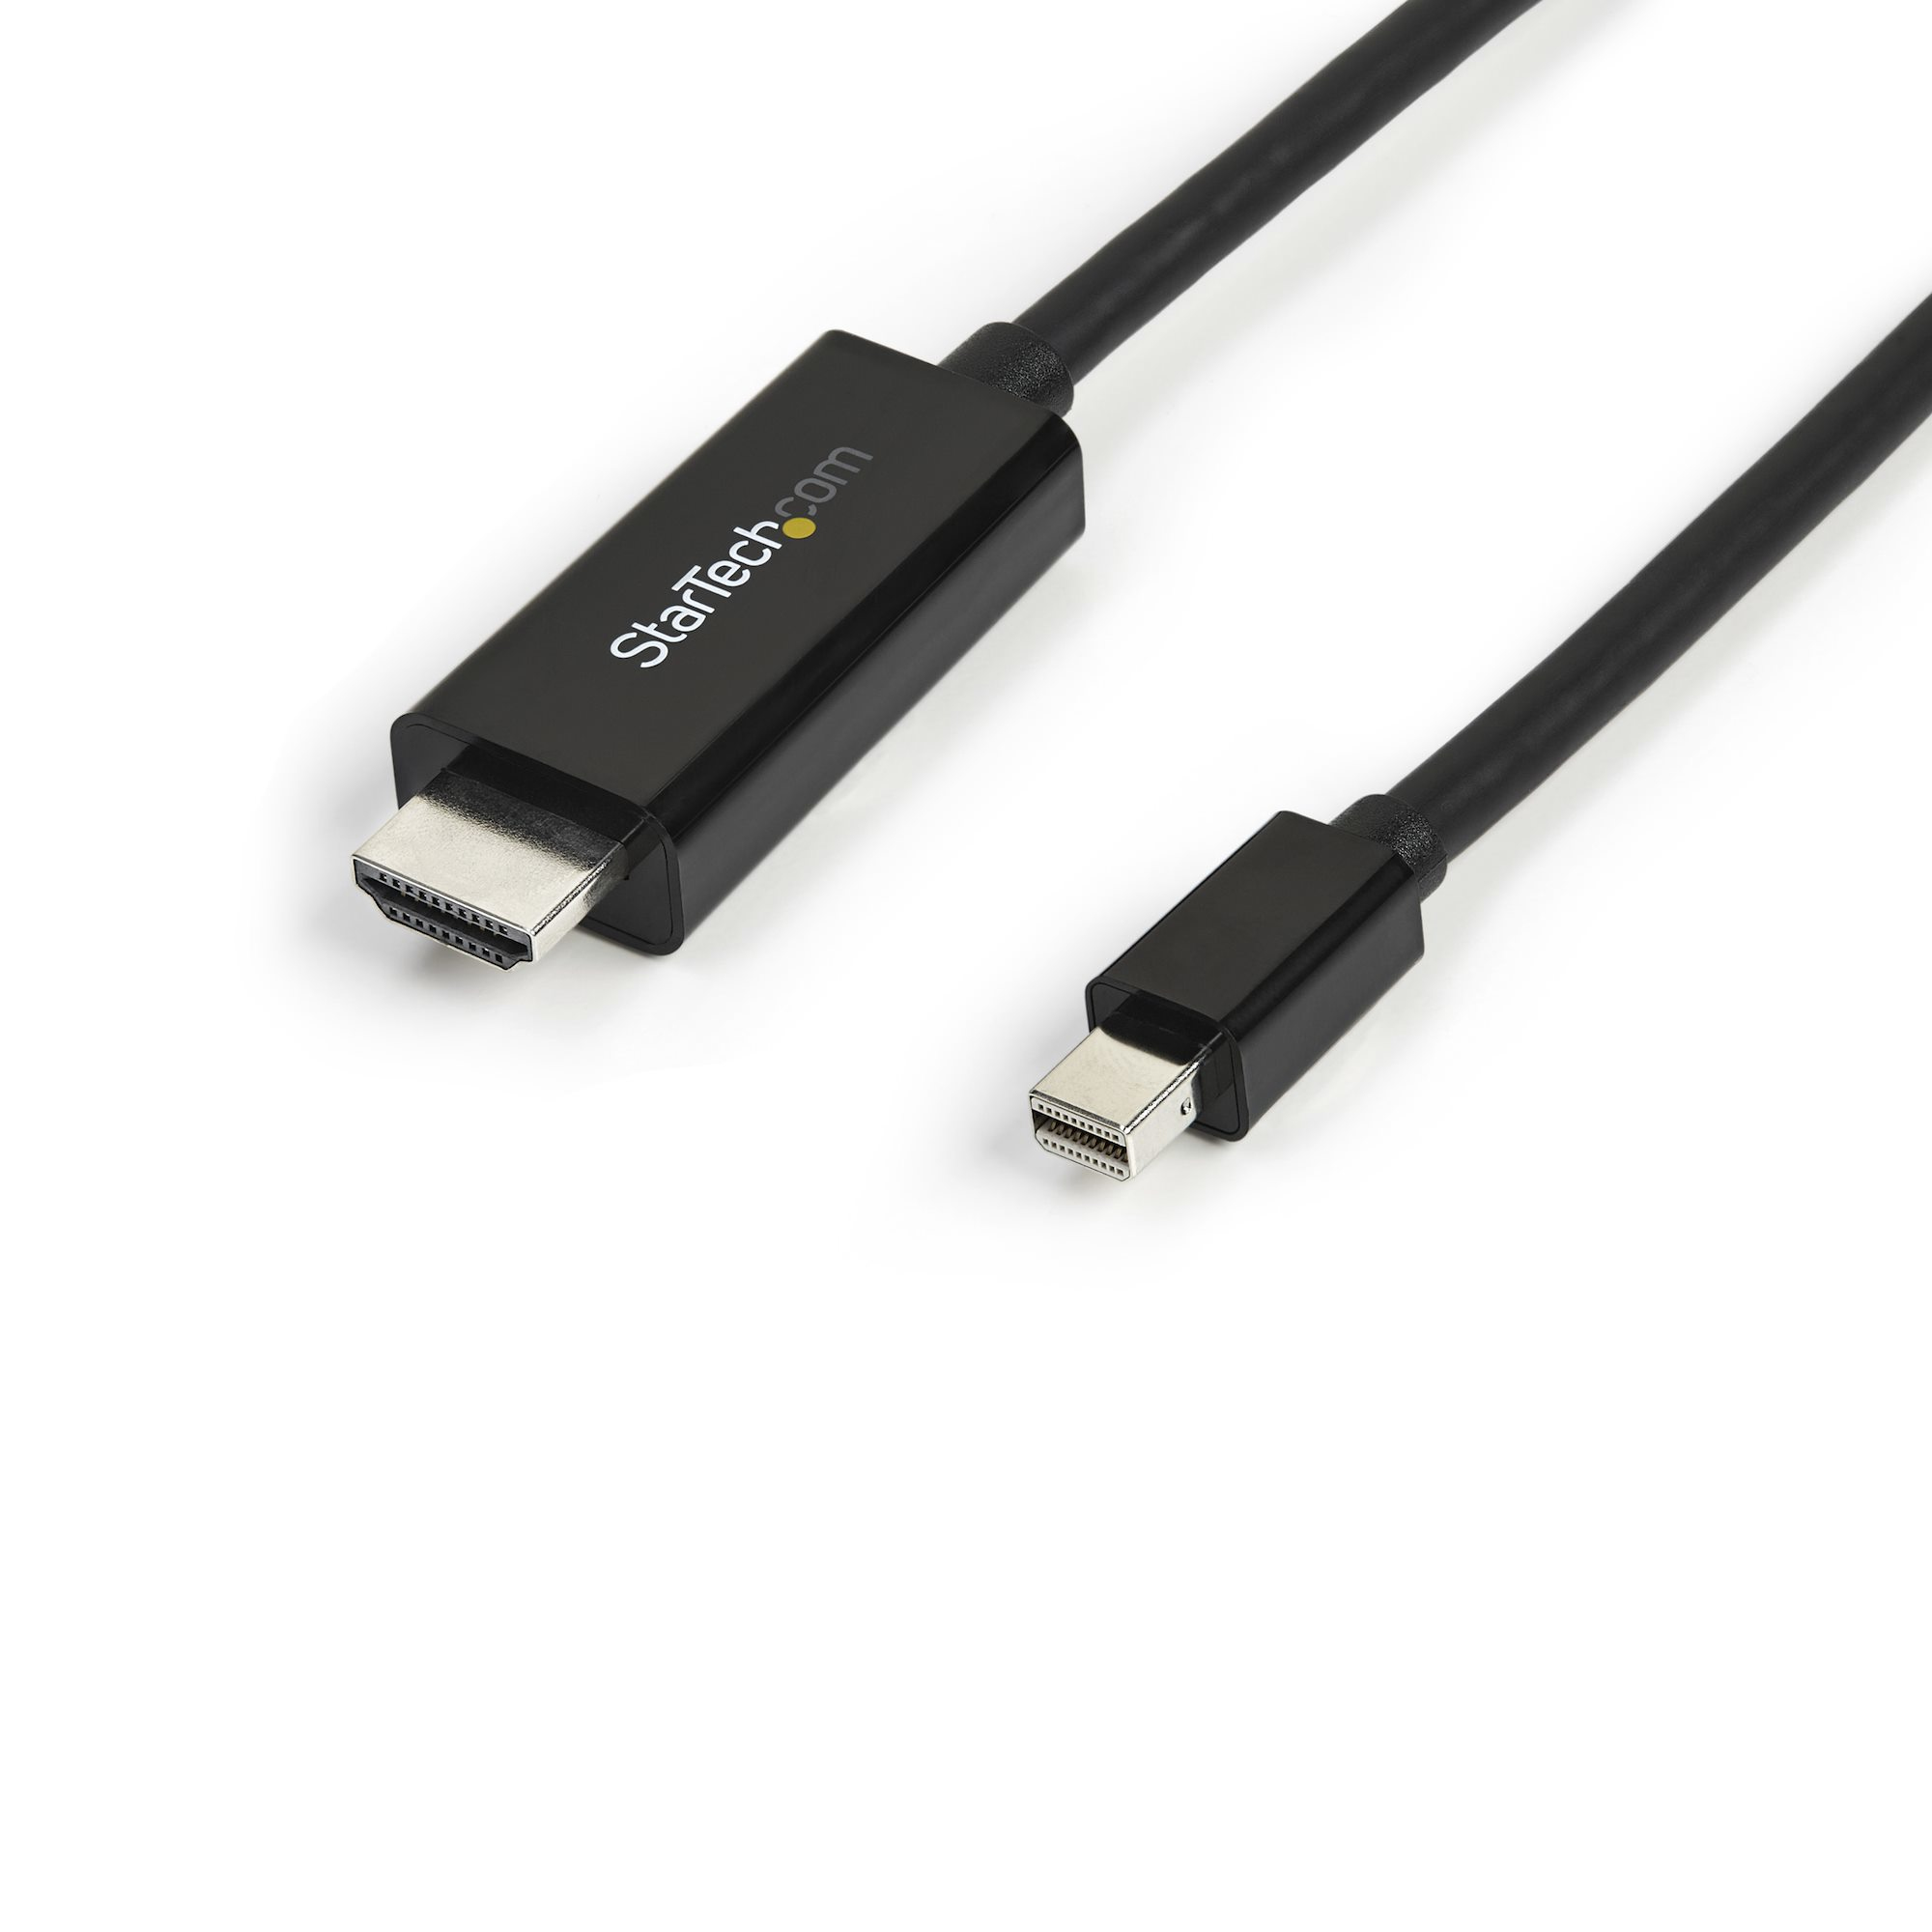 StarTech.com 10ft (3m) Mini DisplayPort to HDMI Cable - 4K 30Hz Video - mDP to HDMI Adapter Cable - Mini DP or Thunderbolt 1/2 Mac/PC to HDMI Monitor/Display - mDP to HDMI Converter Cord